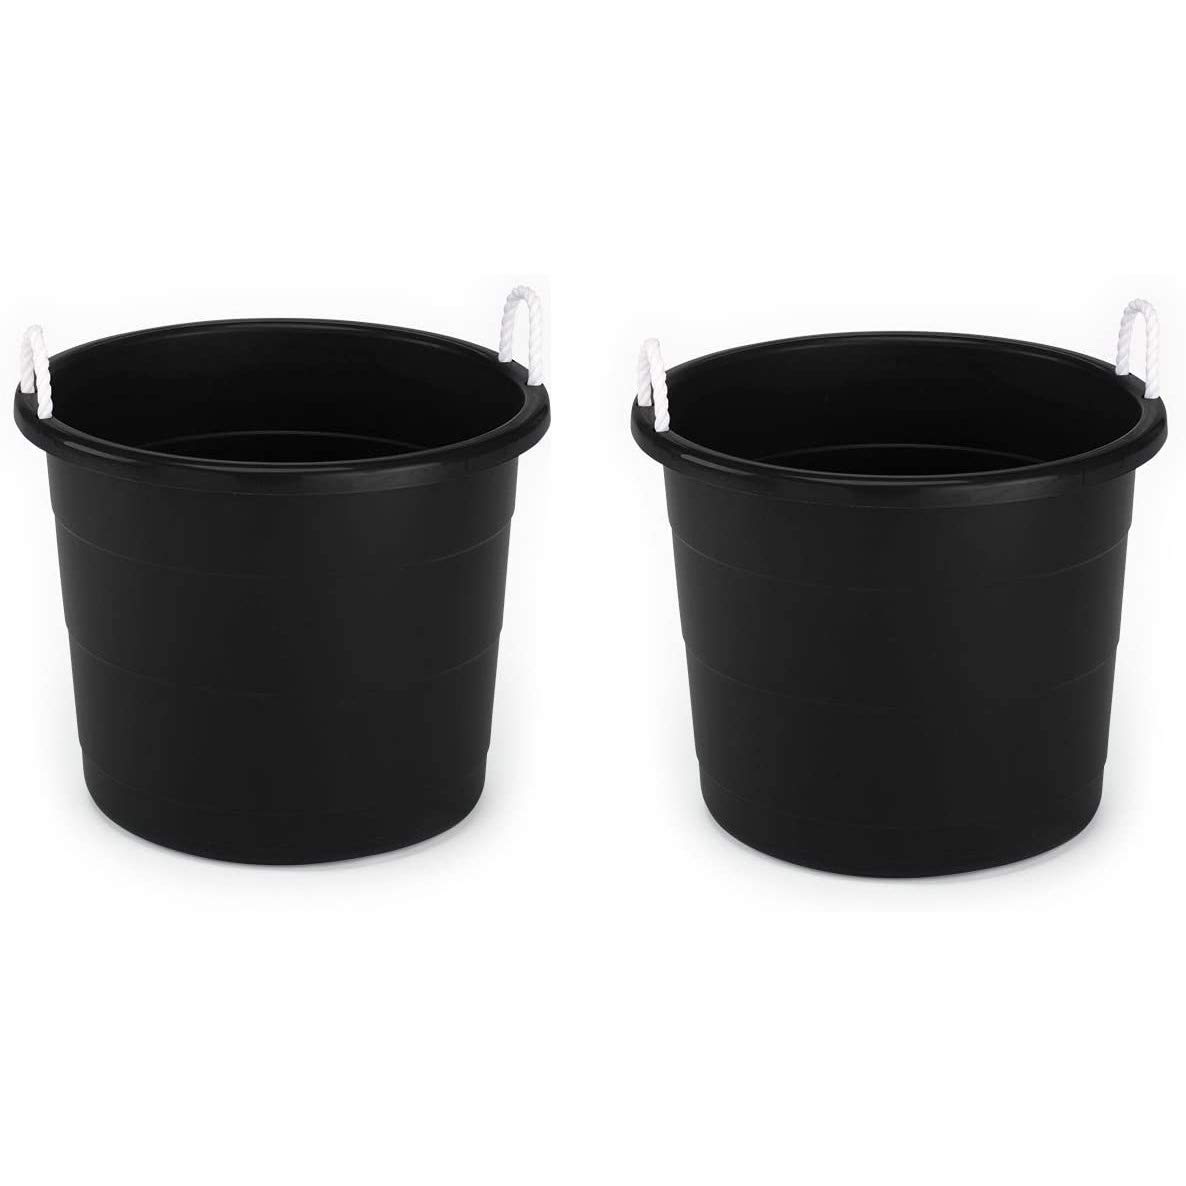 Homz Multipurpose 17 Gallon Plastic Open-Top Storage Round Utility Tub with Rope Handles for Indoor or Outdoor Home Organization, Black (2 Pack)